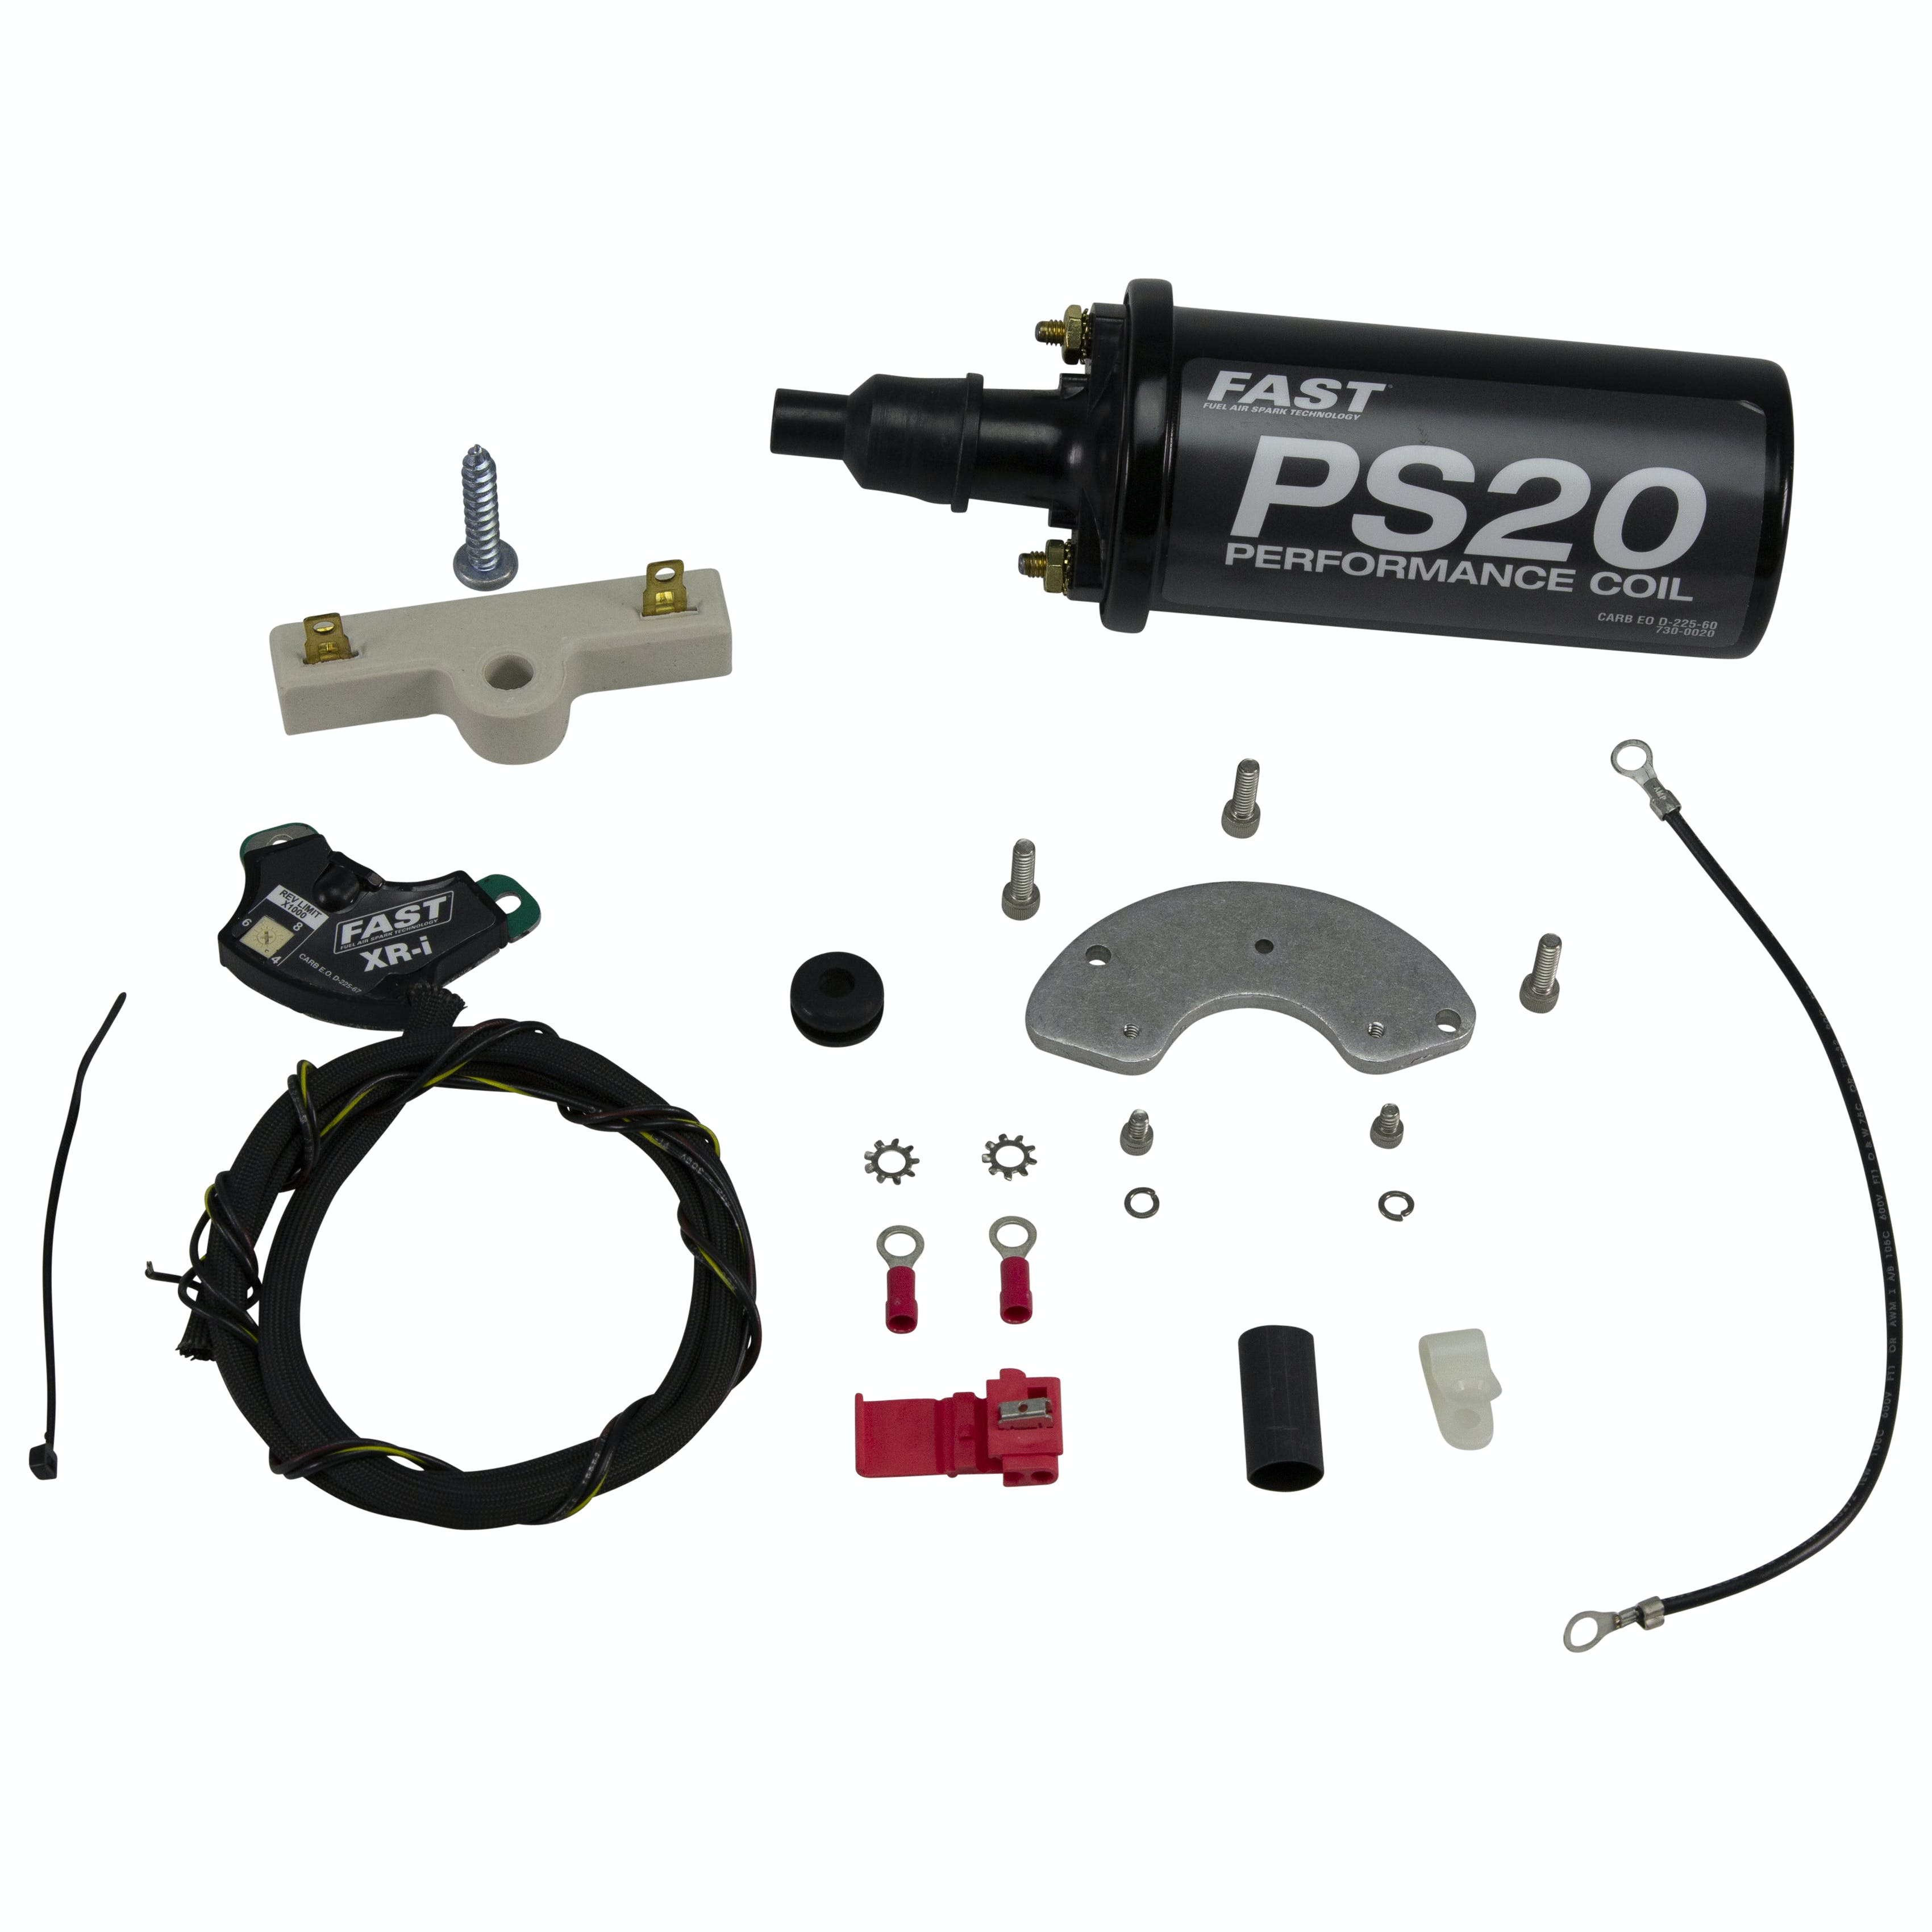 FAST - Fuel Air Spark Technology 750-1725 XR-I Points Replacement with PS20 Coil for Oldsmobile from 1967 to 1974